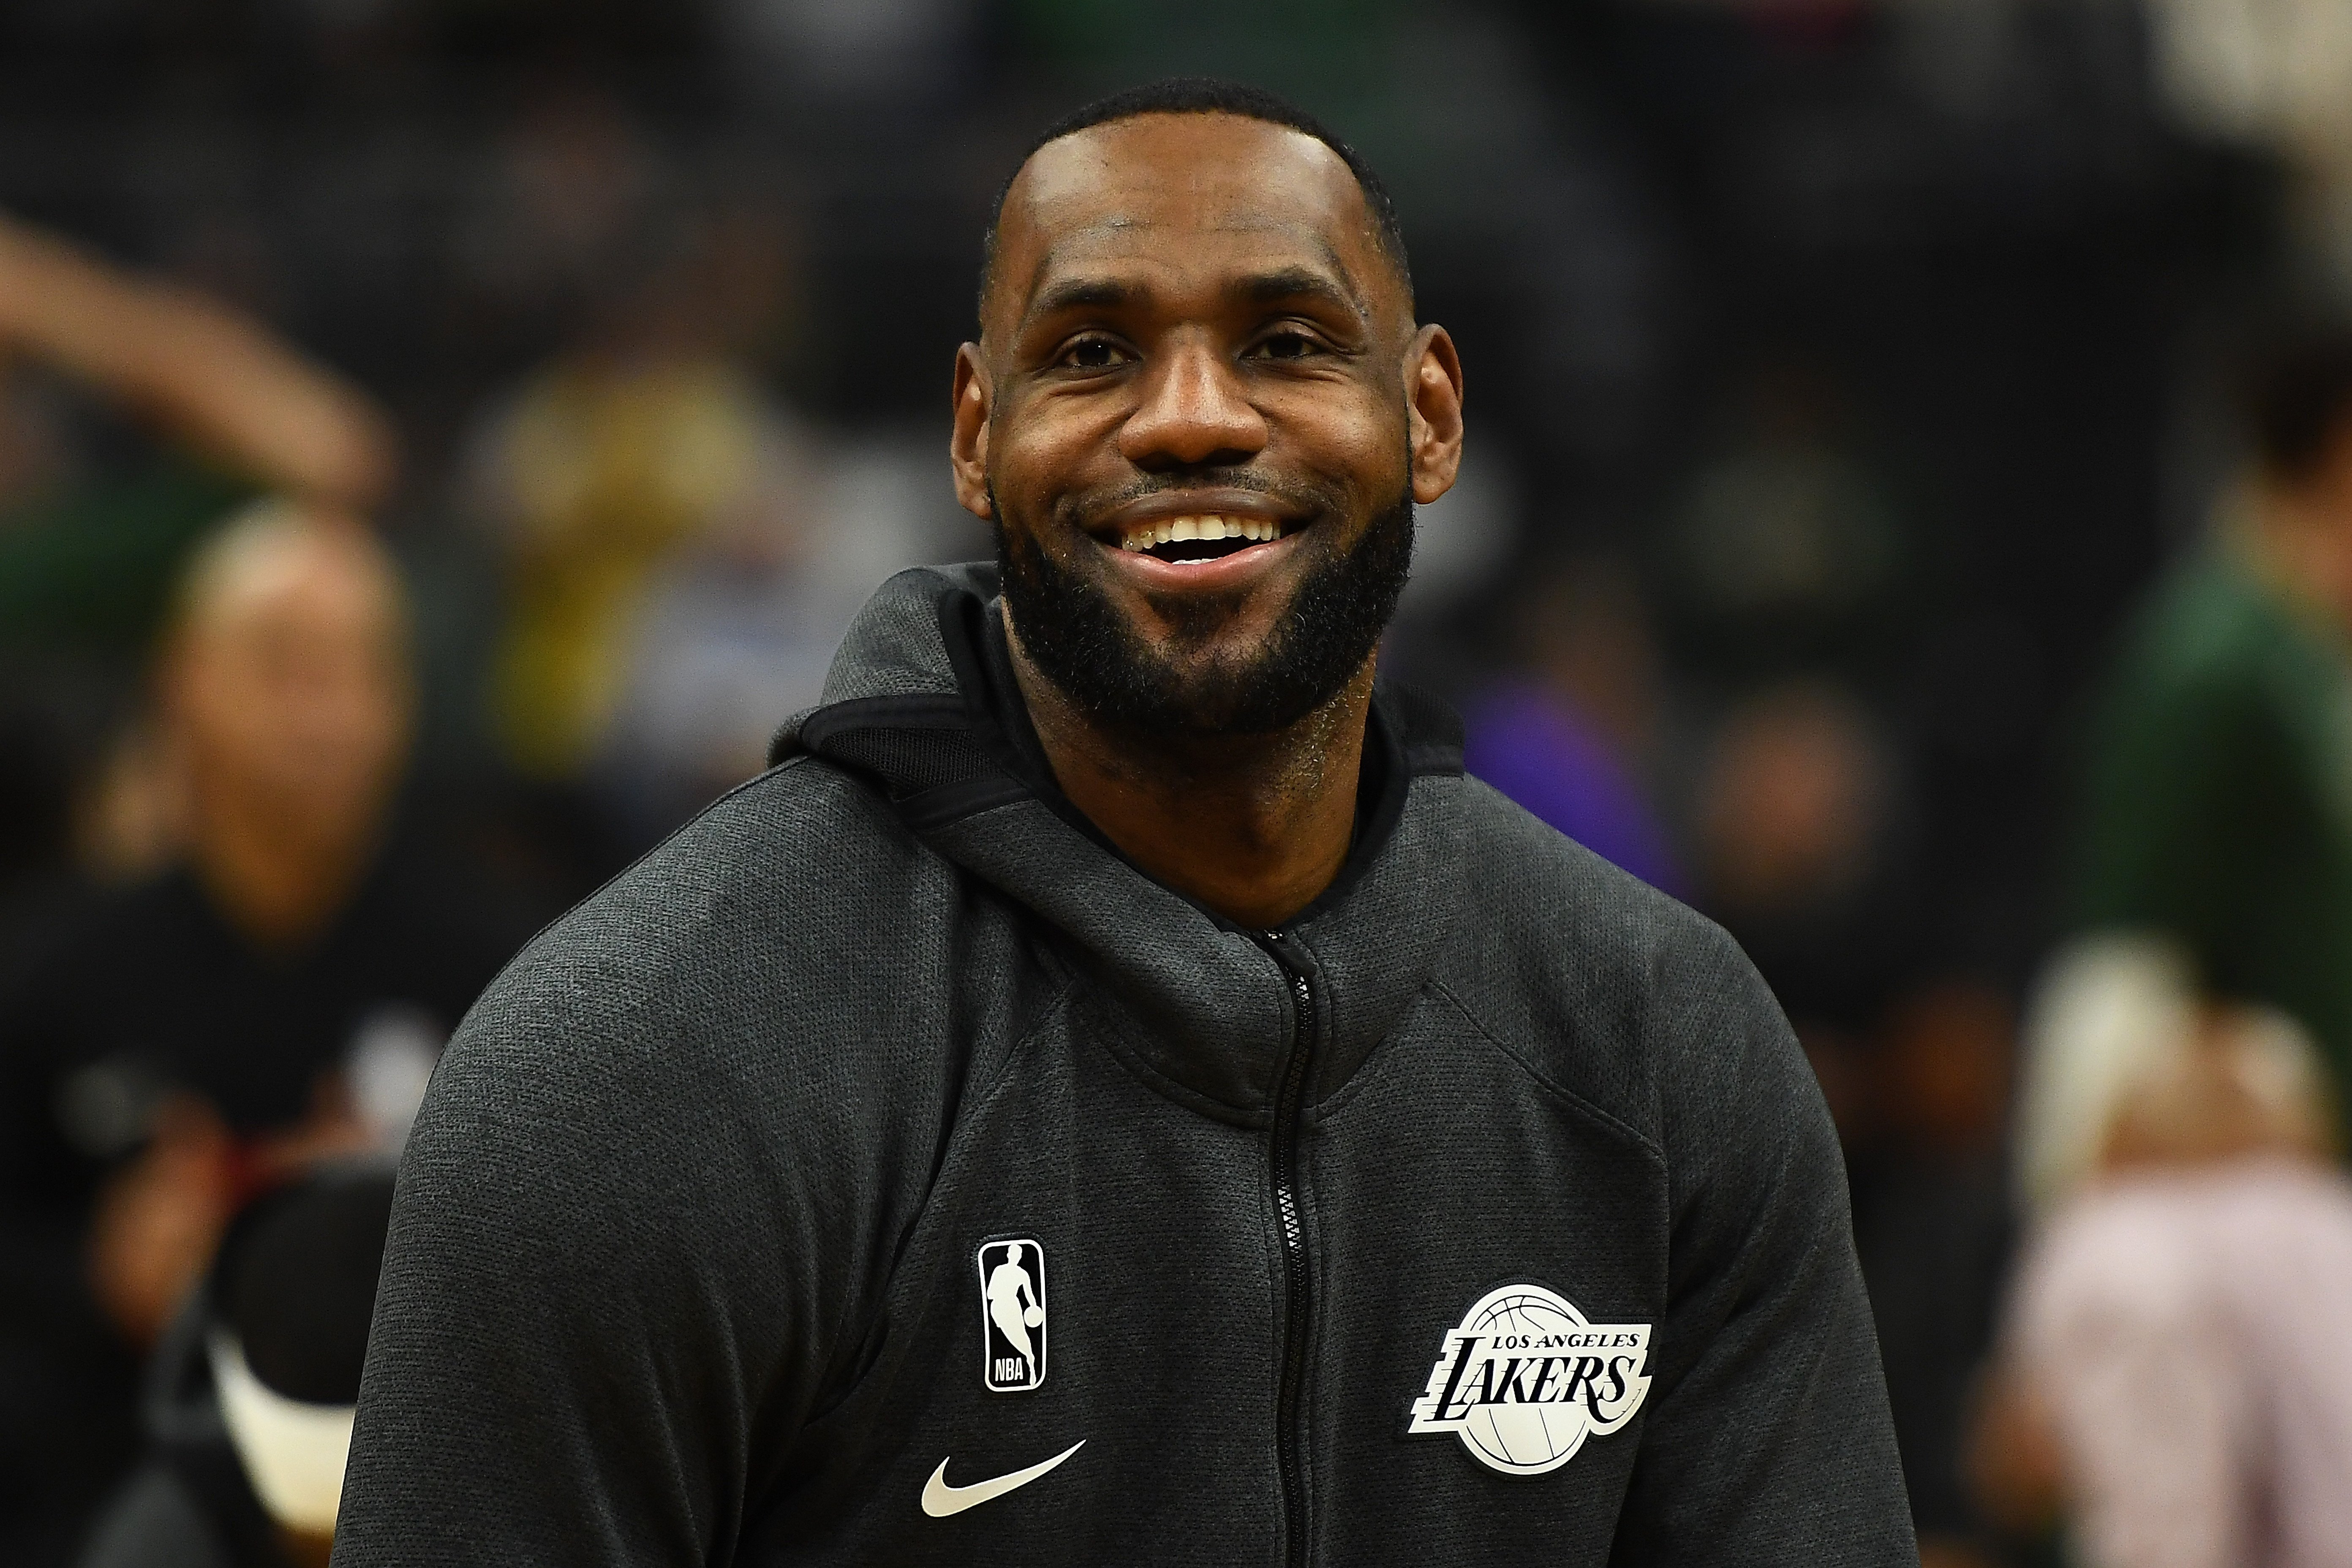  LeBron James in warmups prior to a game against the Milwaukee Bucks at Fiserv Forum on December 19, 2019 | Photo: Getty Images